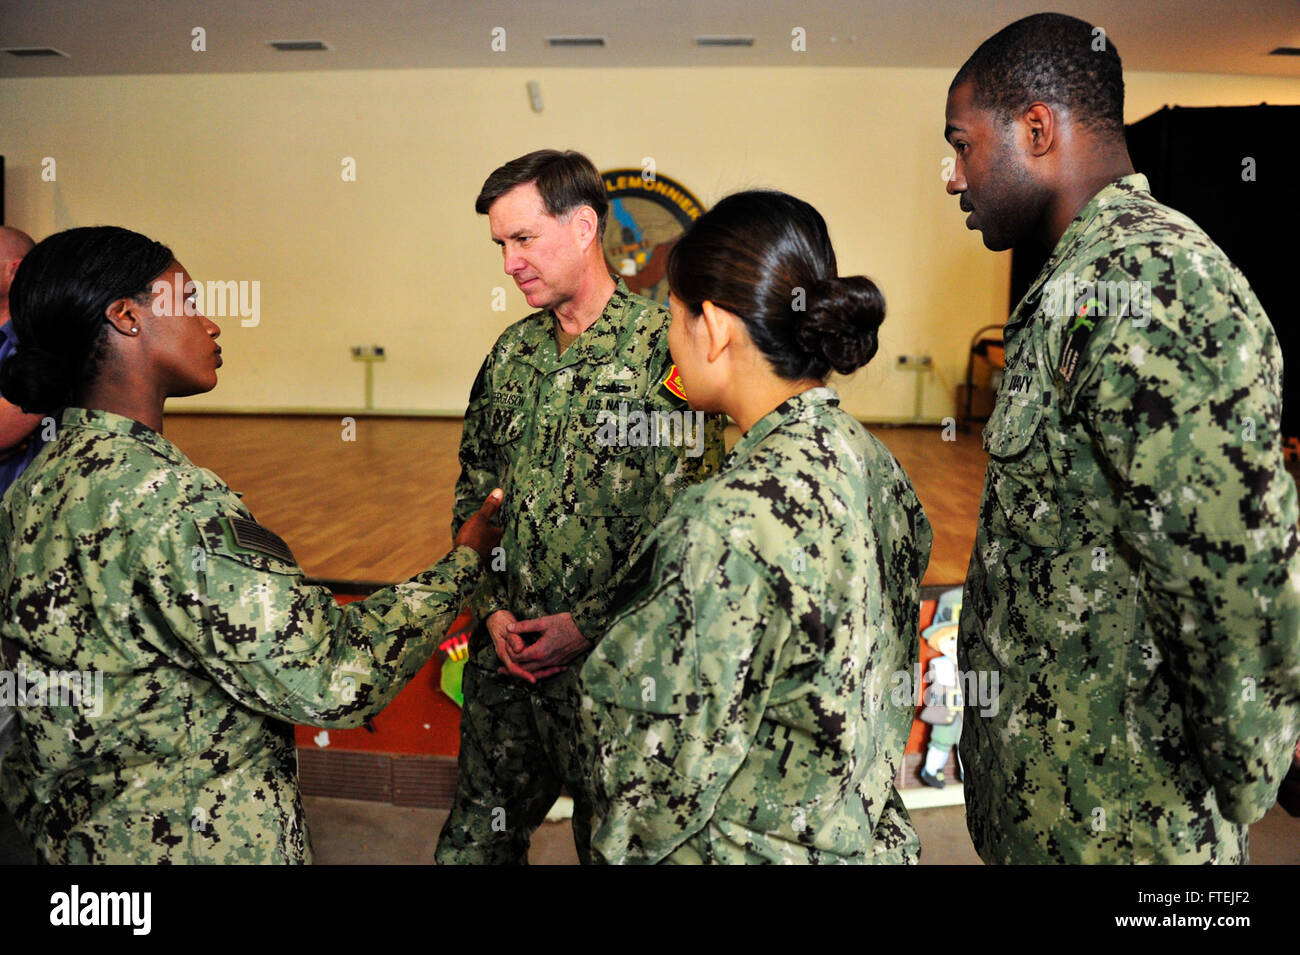 CAMP LEMONNIER, Djibouti (Nov. 27, 2014) Adm. Mark Ferguson, commander, U.S. Naval Forces Europe-Africa (center) speaks to Sailors after an All Hands Call at Camp Lemonnier. Ferguson visited Camp Lemonnier to thank Sailors for supporting forward U.S. forces and for strengthening security in East Africa. Stock Photo